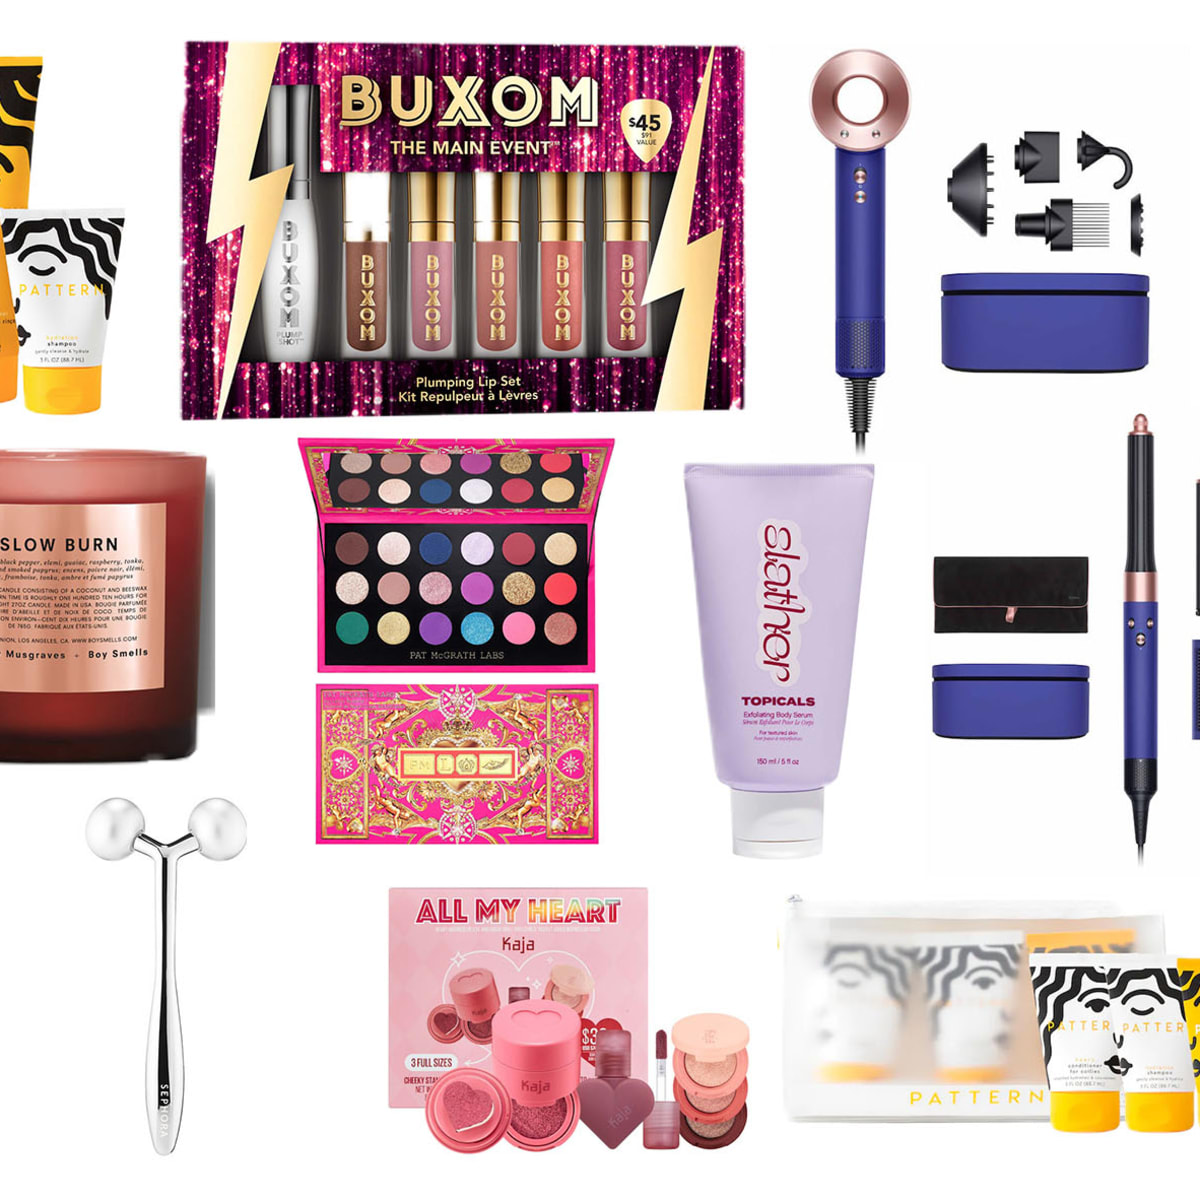 22 Beauty Products We're Buying During the Sephora Holiday Savings